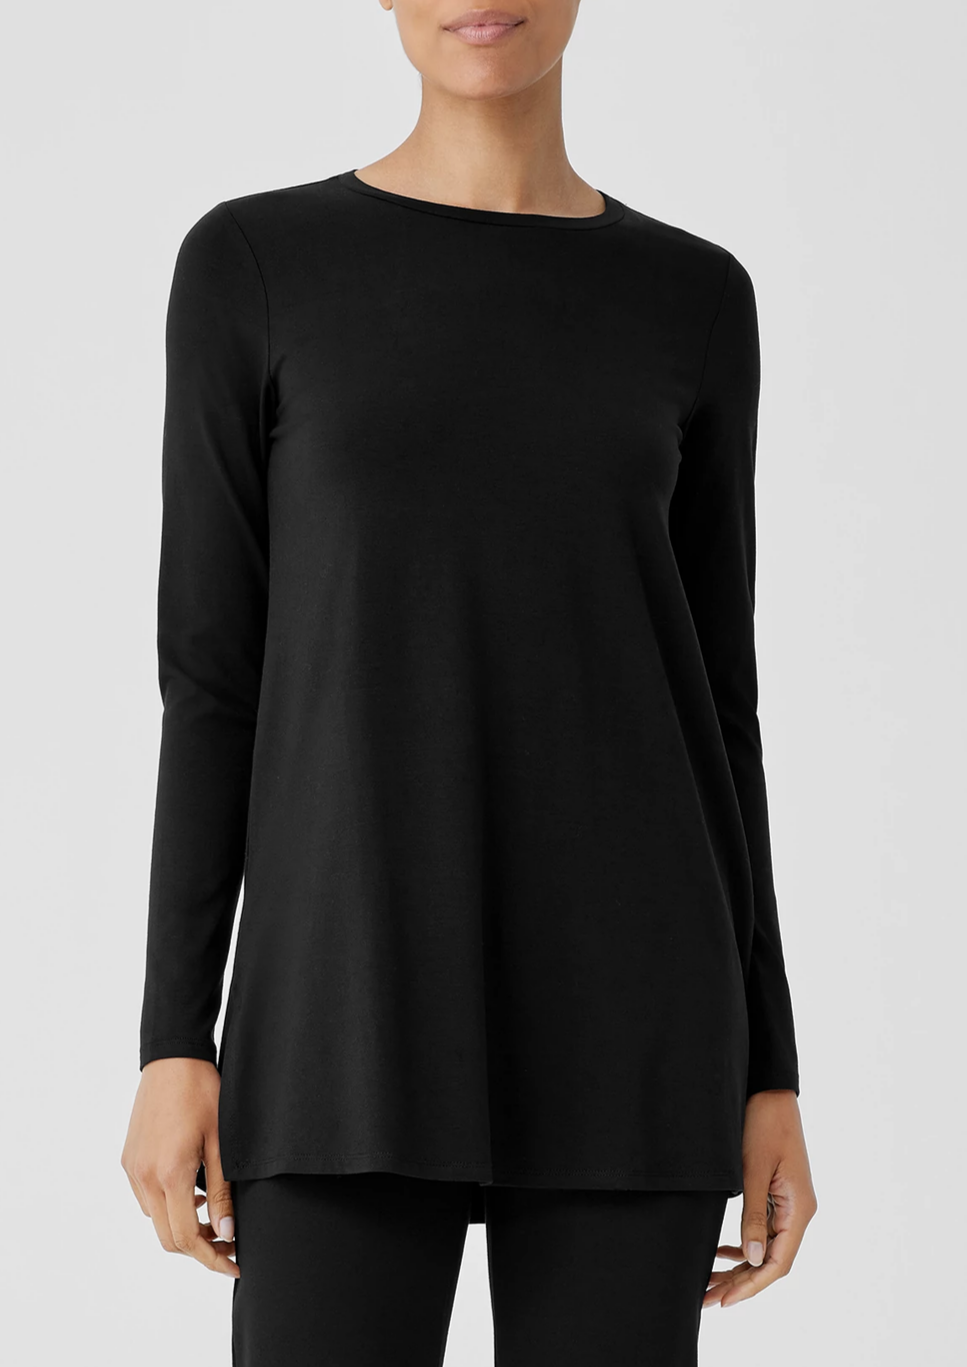 Eileen Fisher - Stretch Jersey Knit Crew Neck Long Top